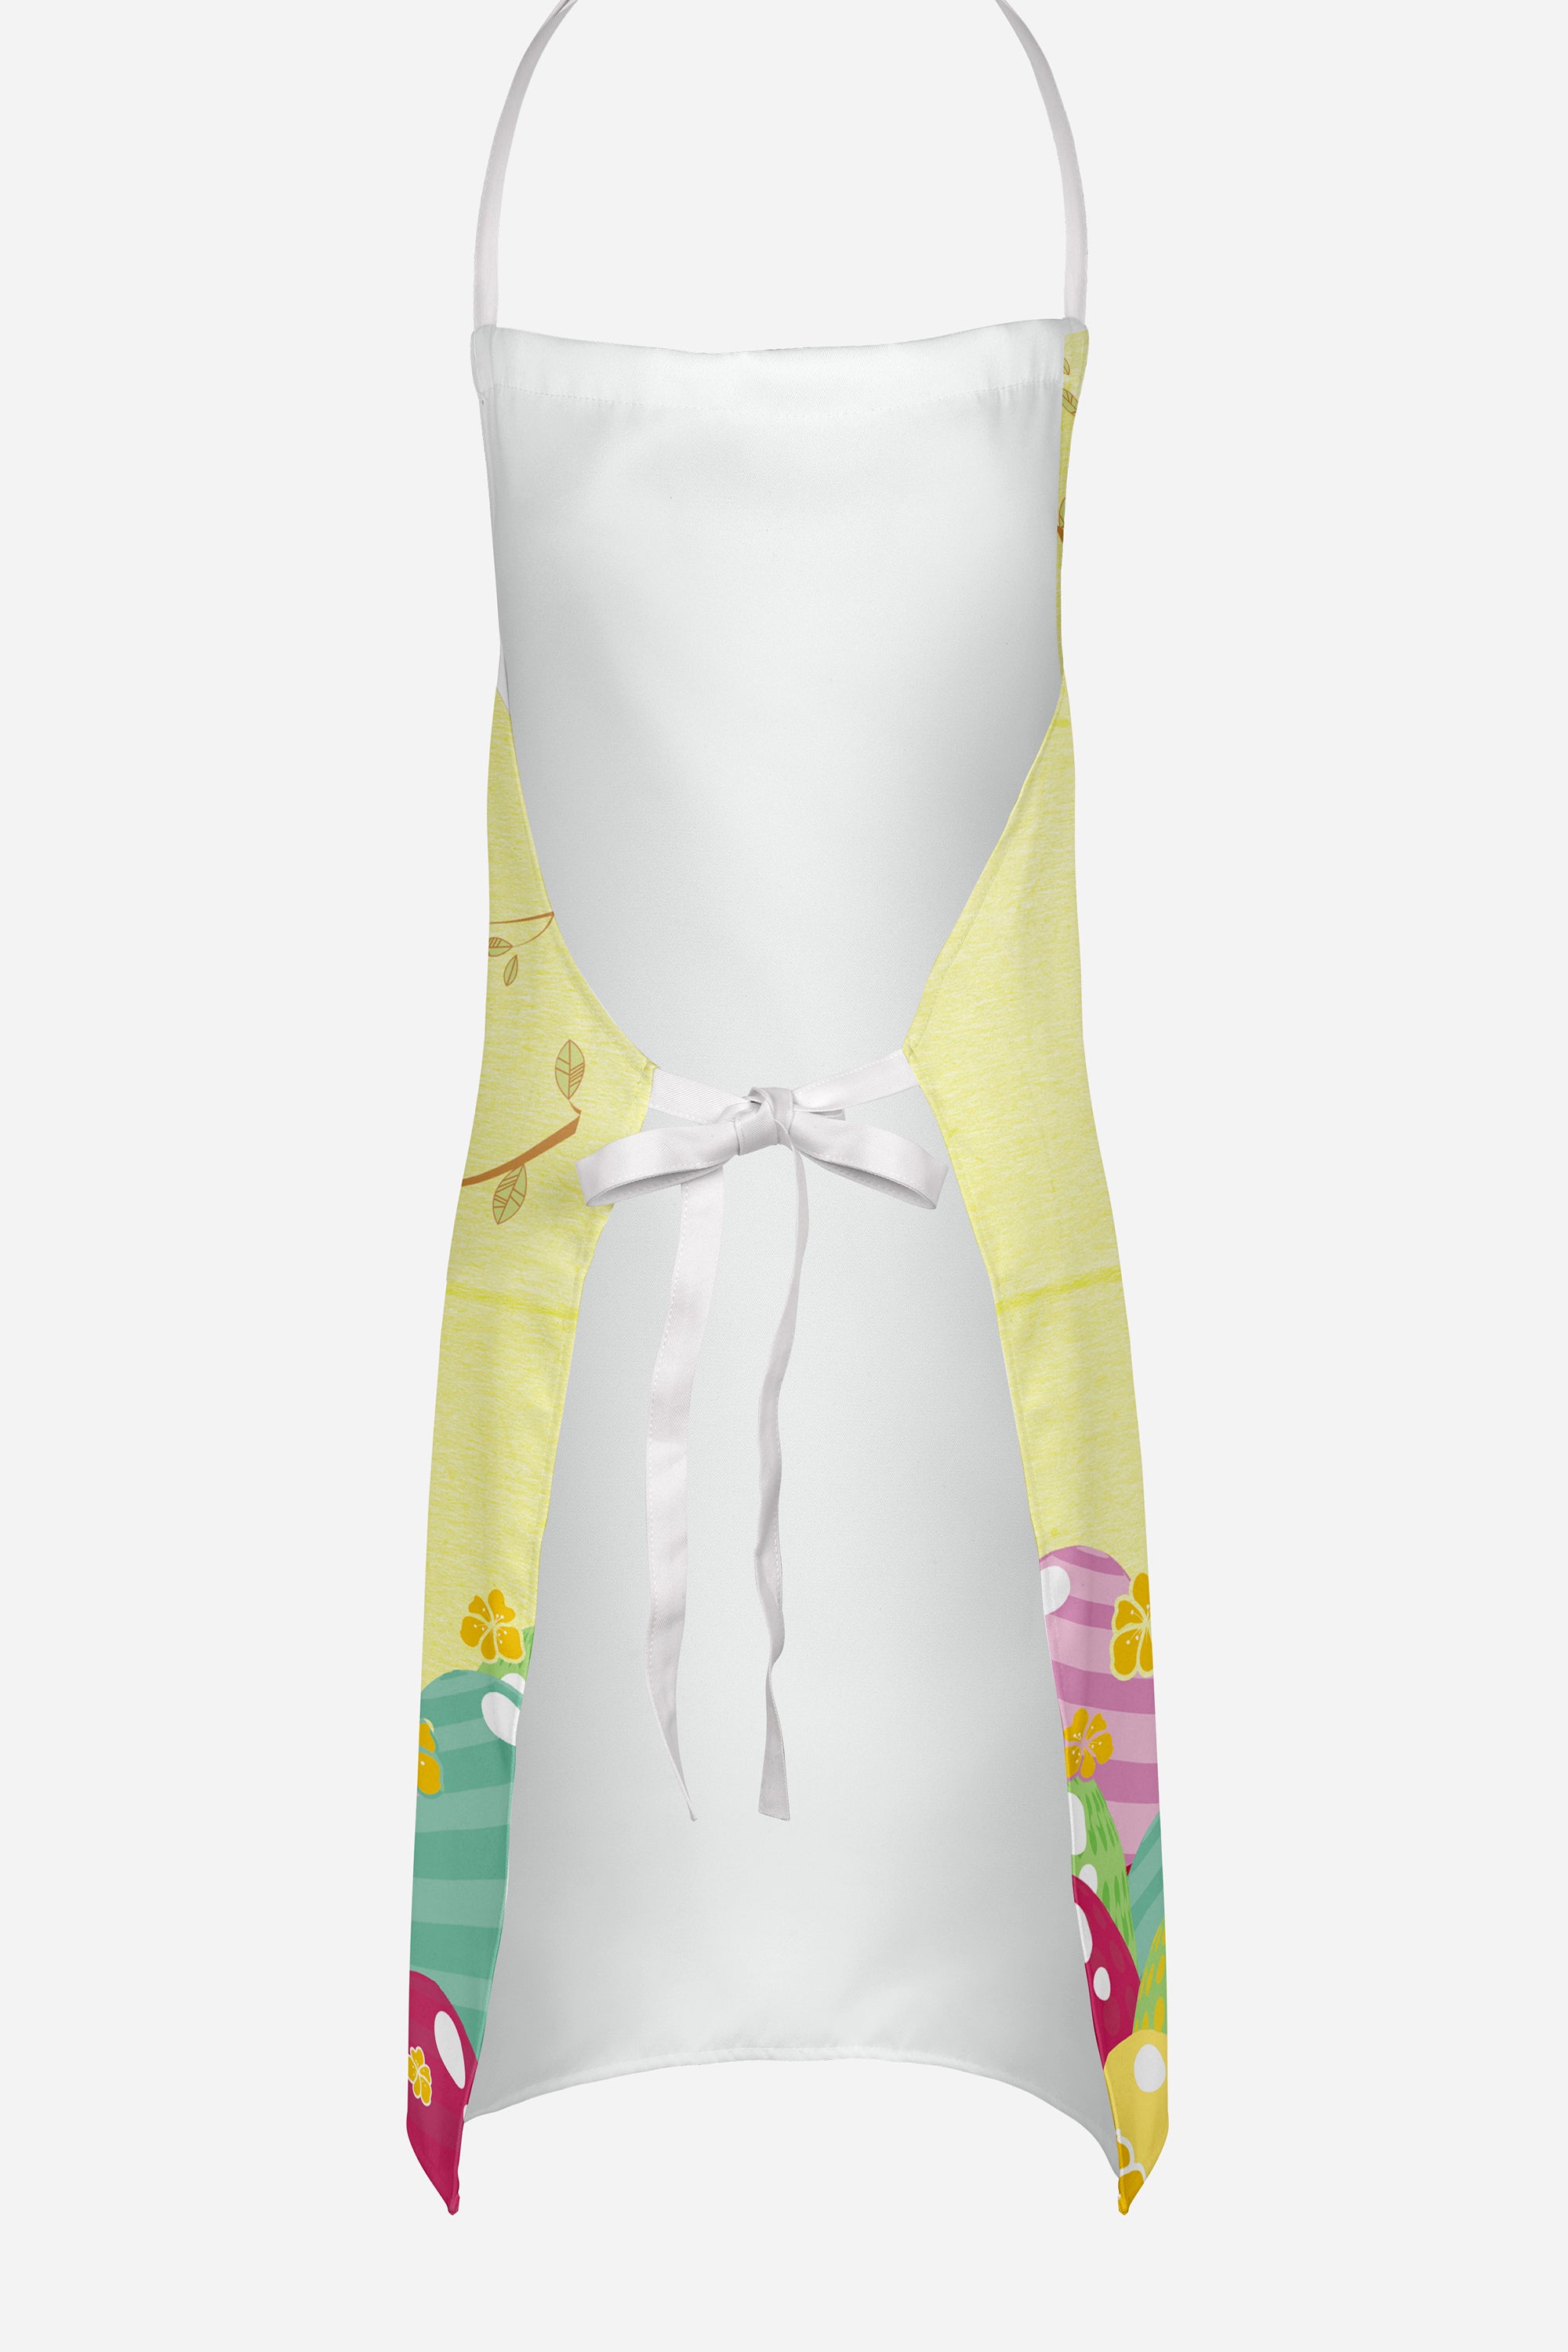 Easter Eggs Wire Fox Terrier Apron BB6101APRON